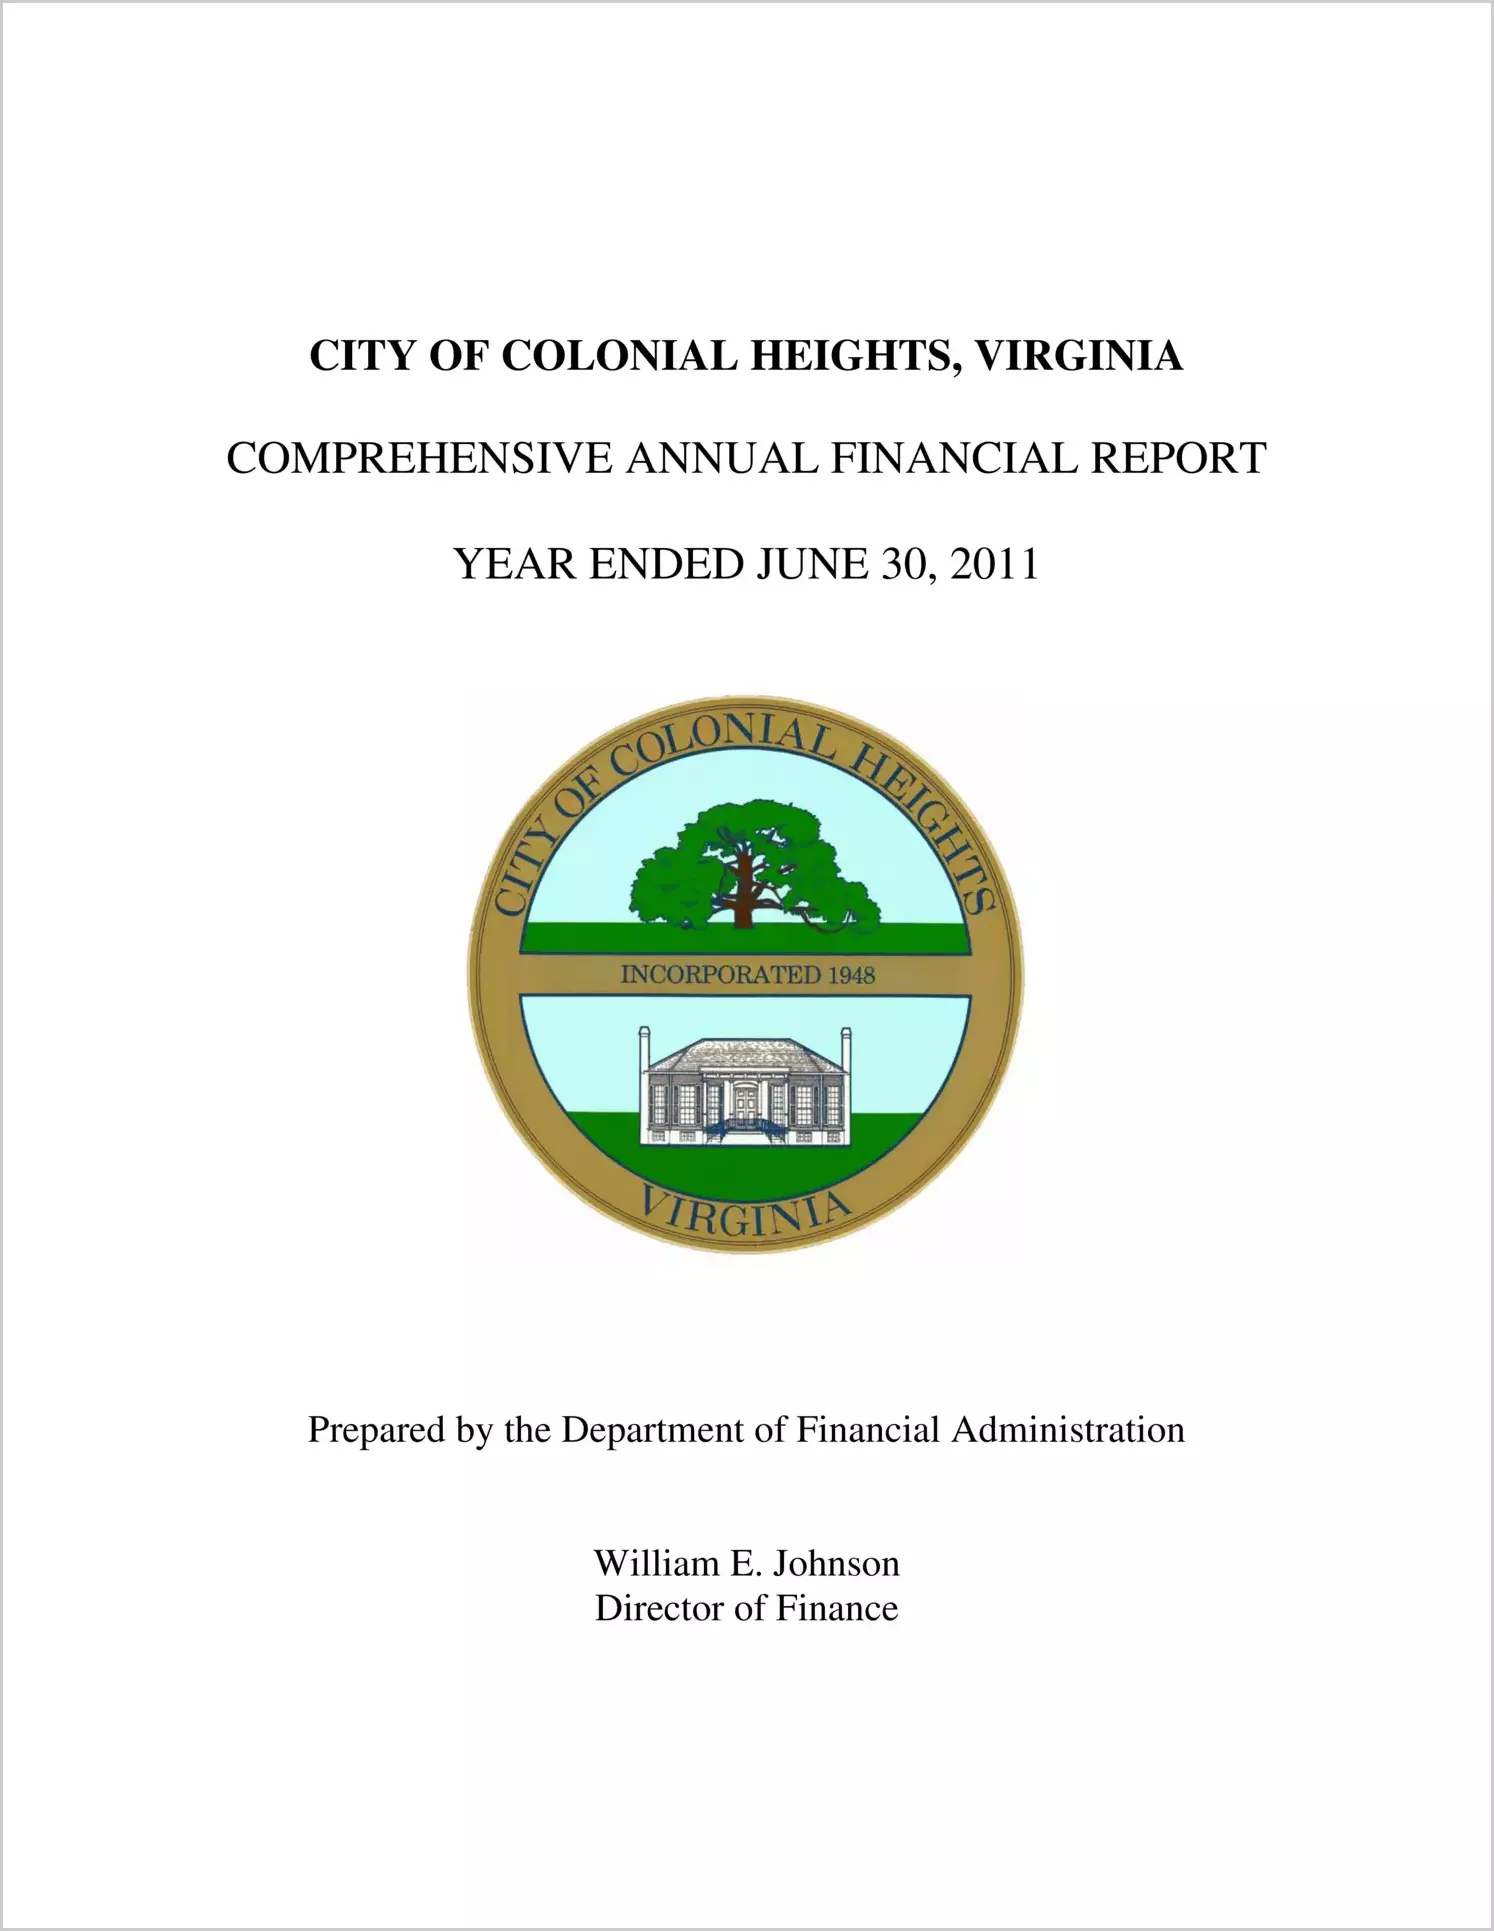 2011 Annual Financial Report for City of Colonial Heights